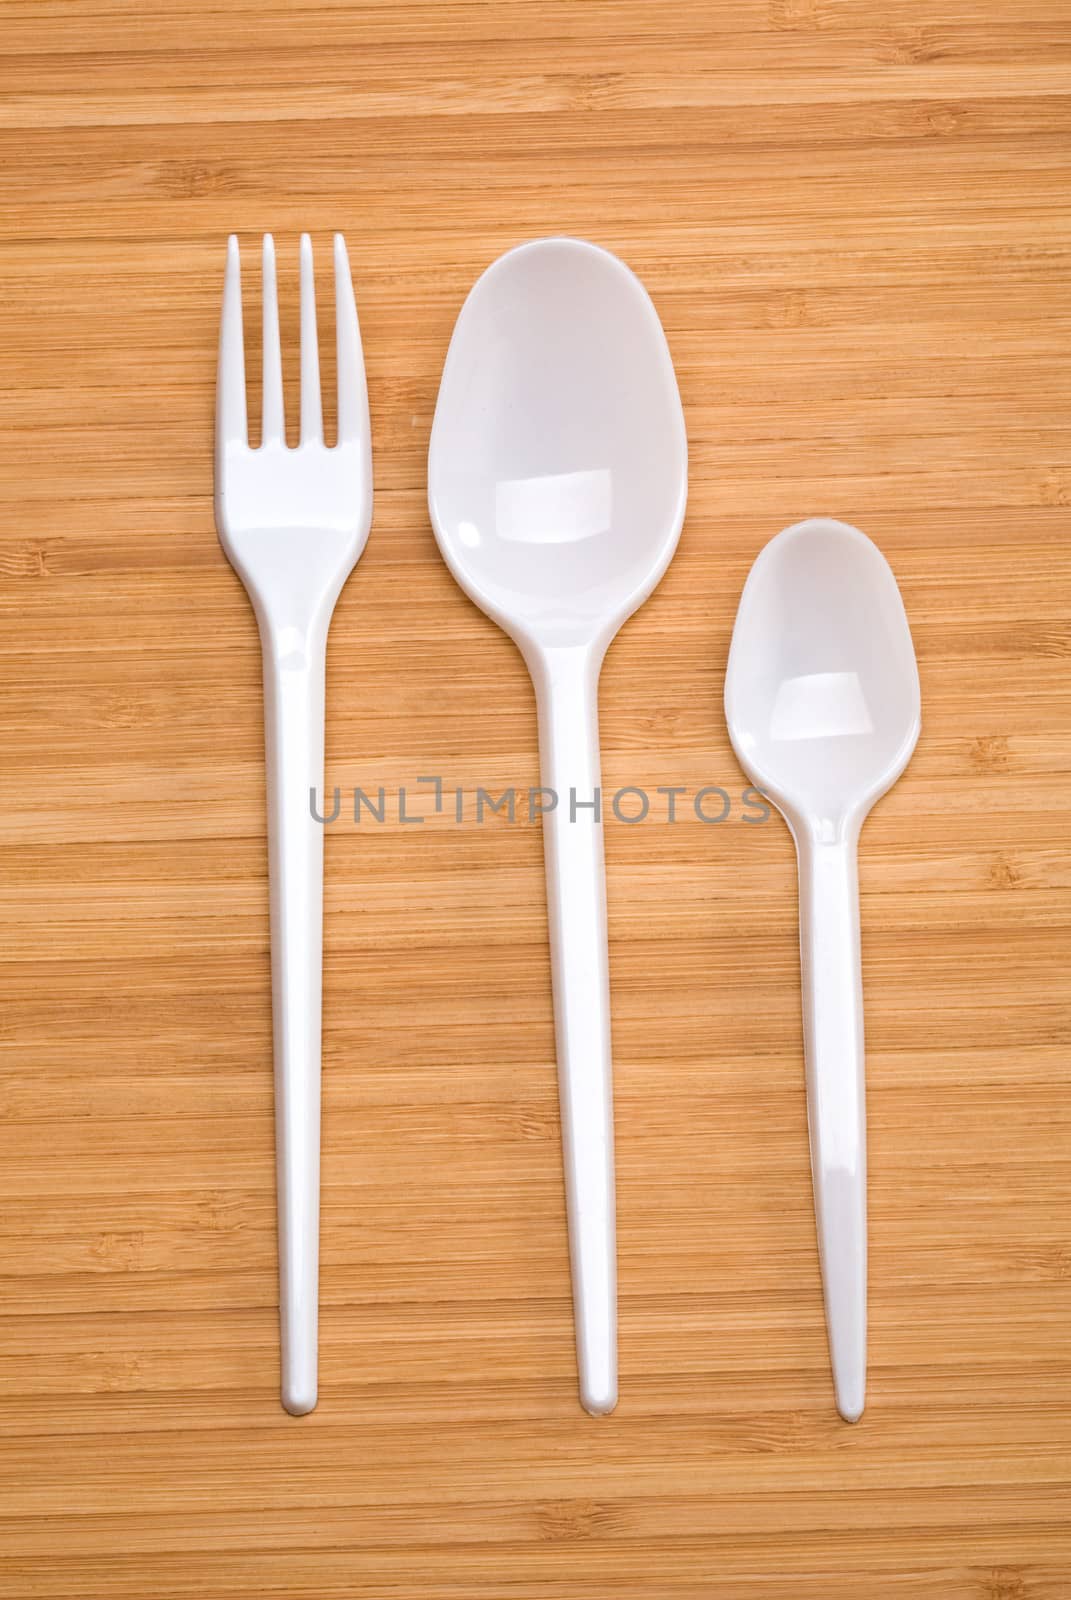 plastic disposable cutlery on a wooden background